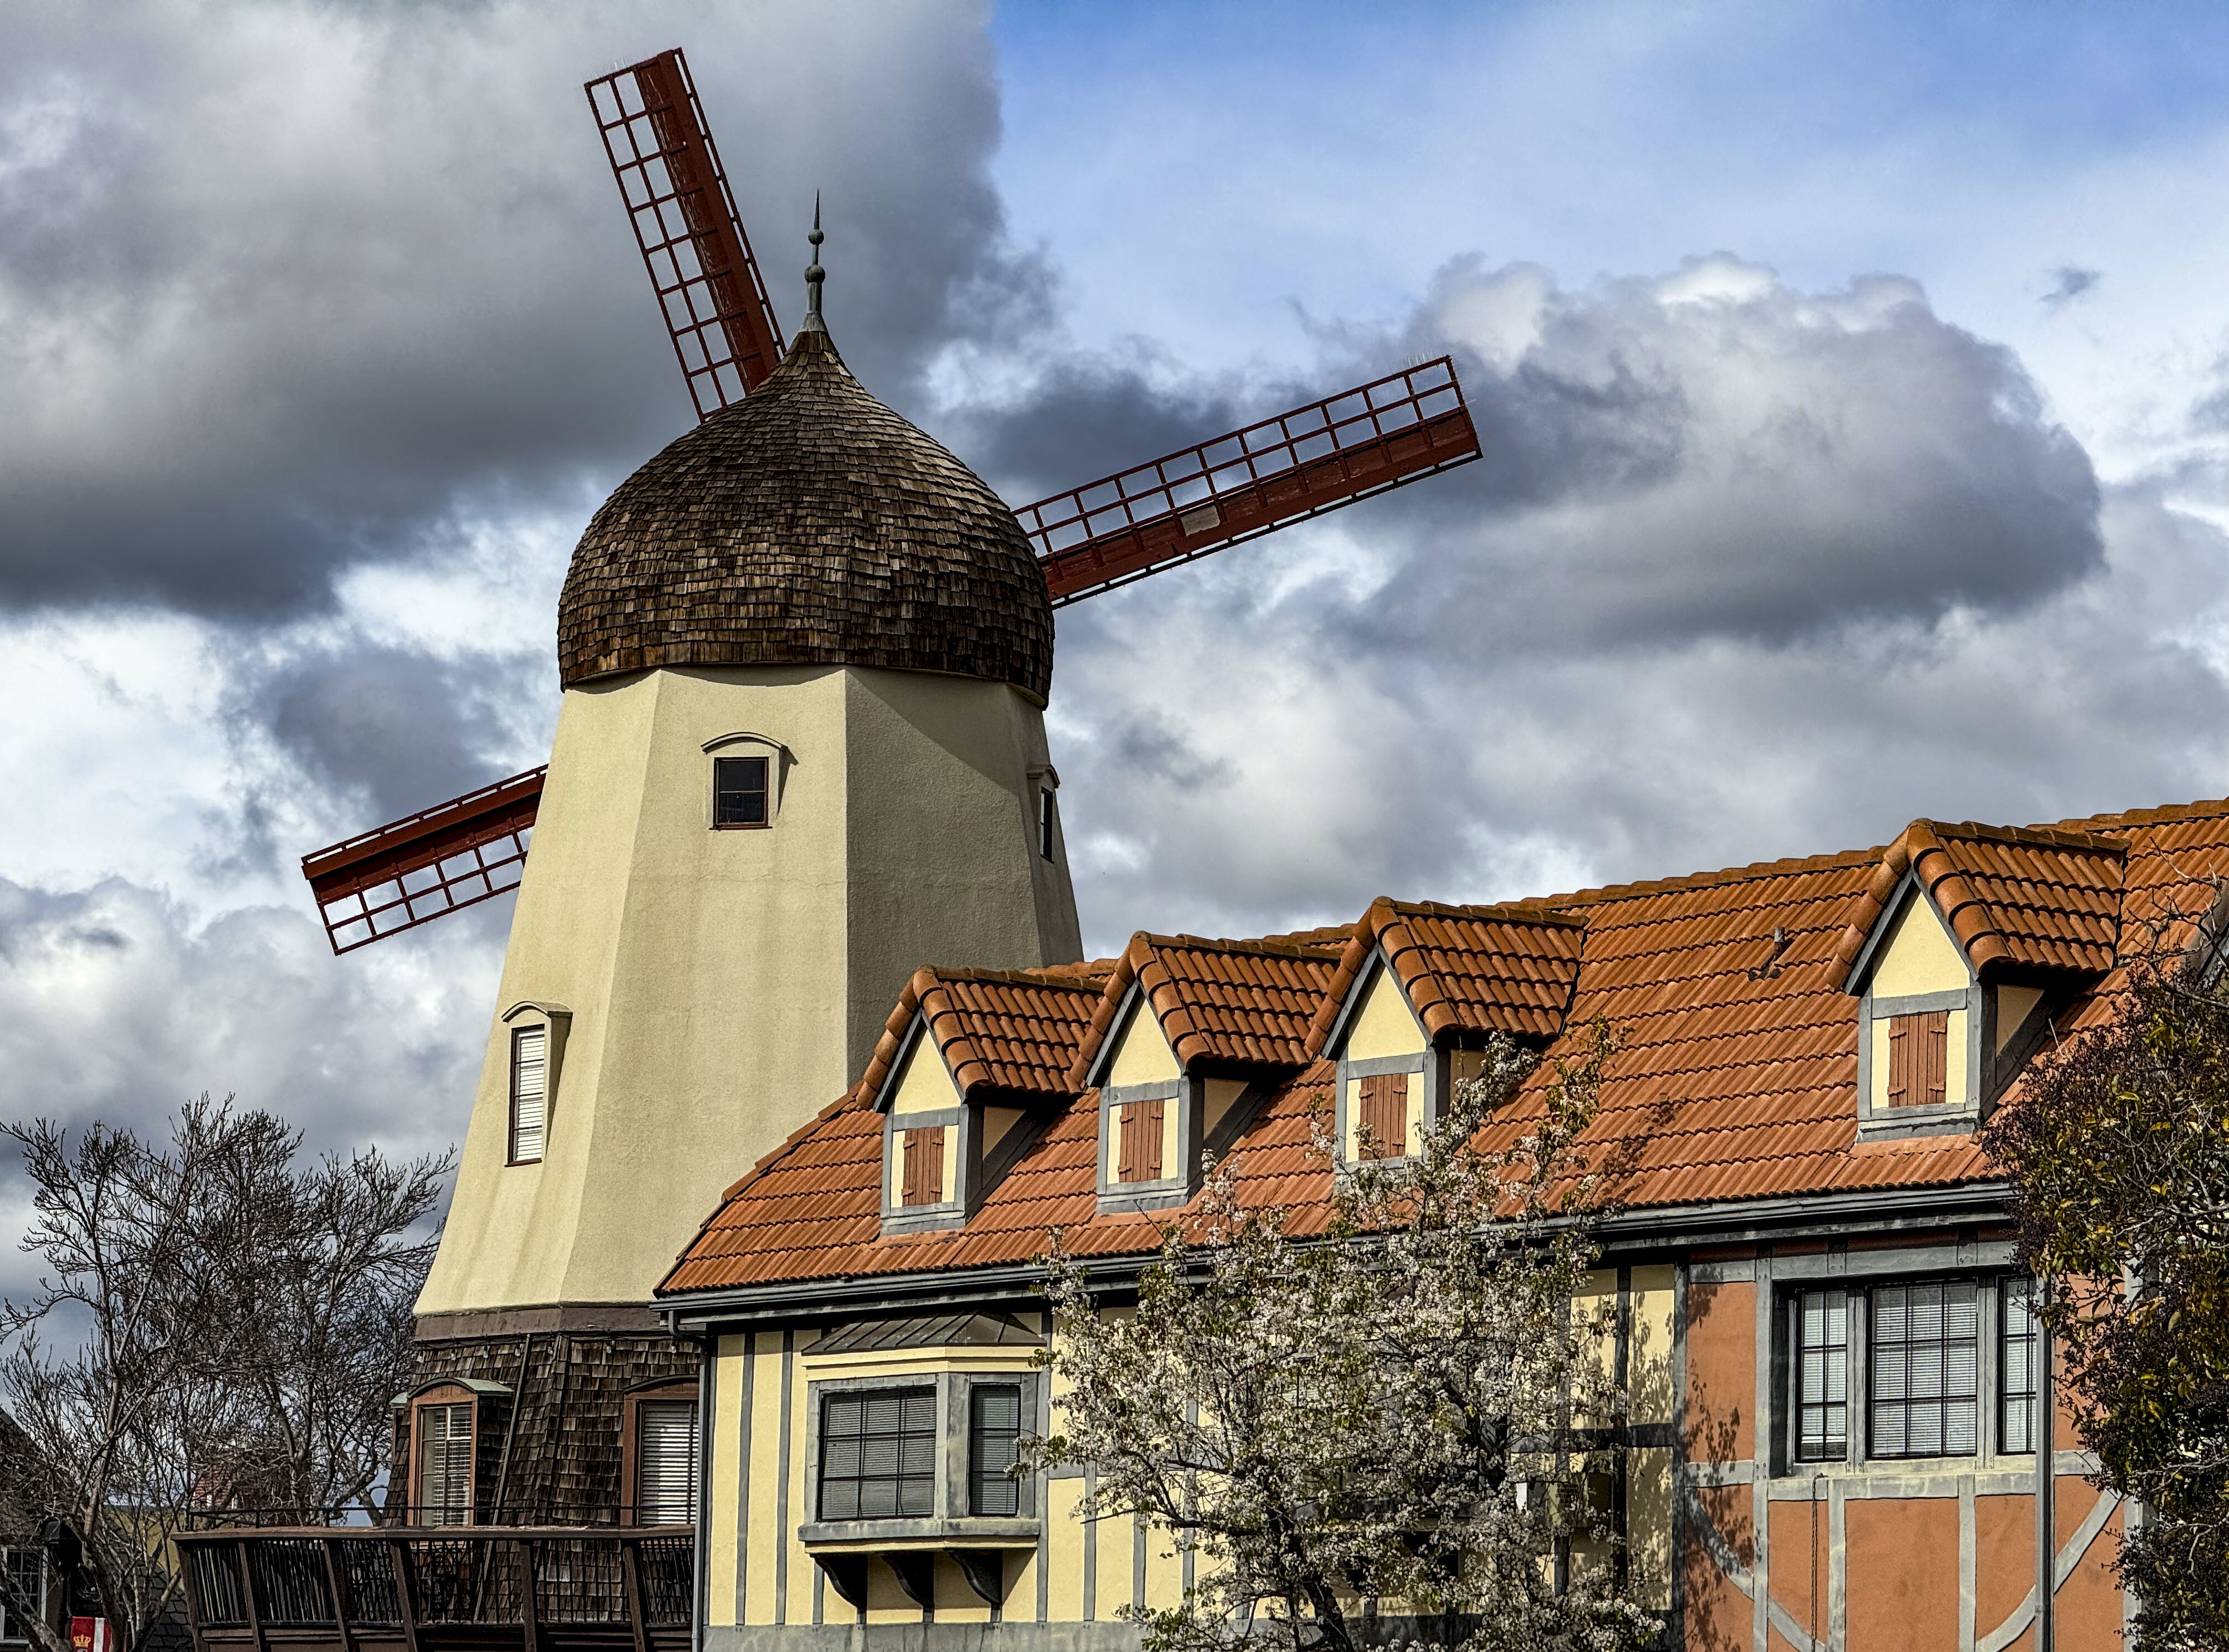 Traditional windmill above European-style building against cloudy sky